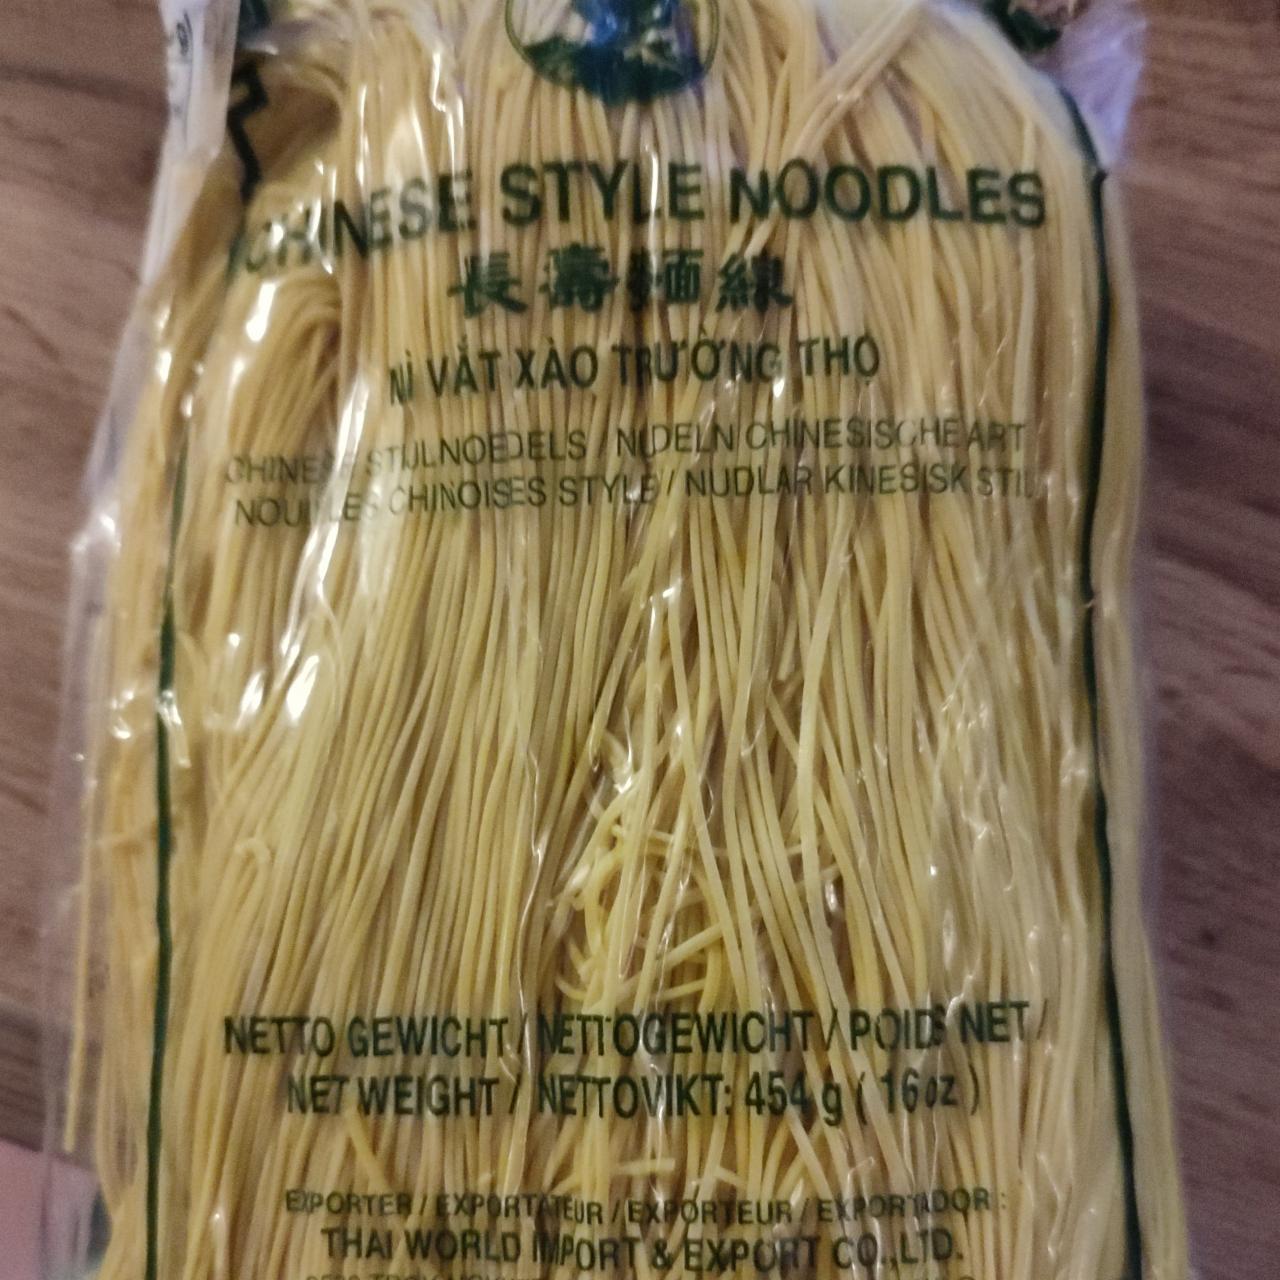 Fotografie - Chinese Style Noodles Cock brand